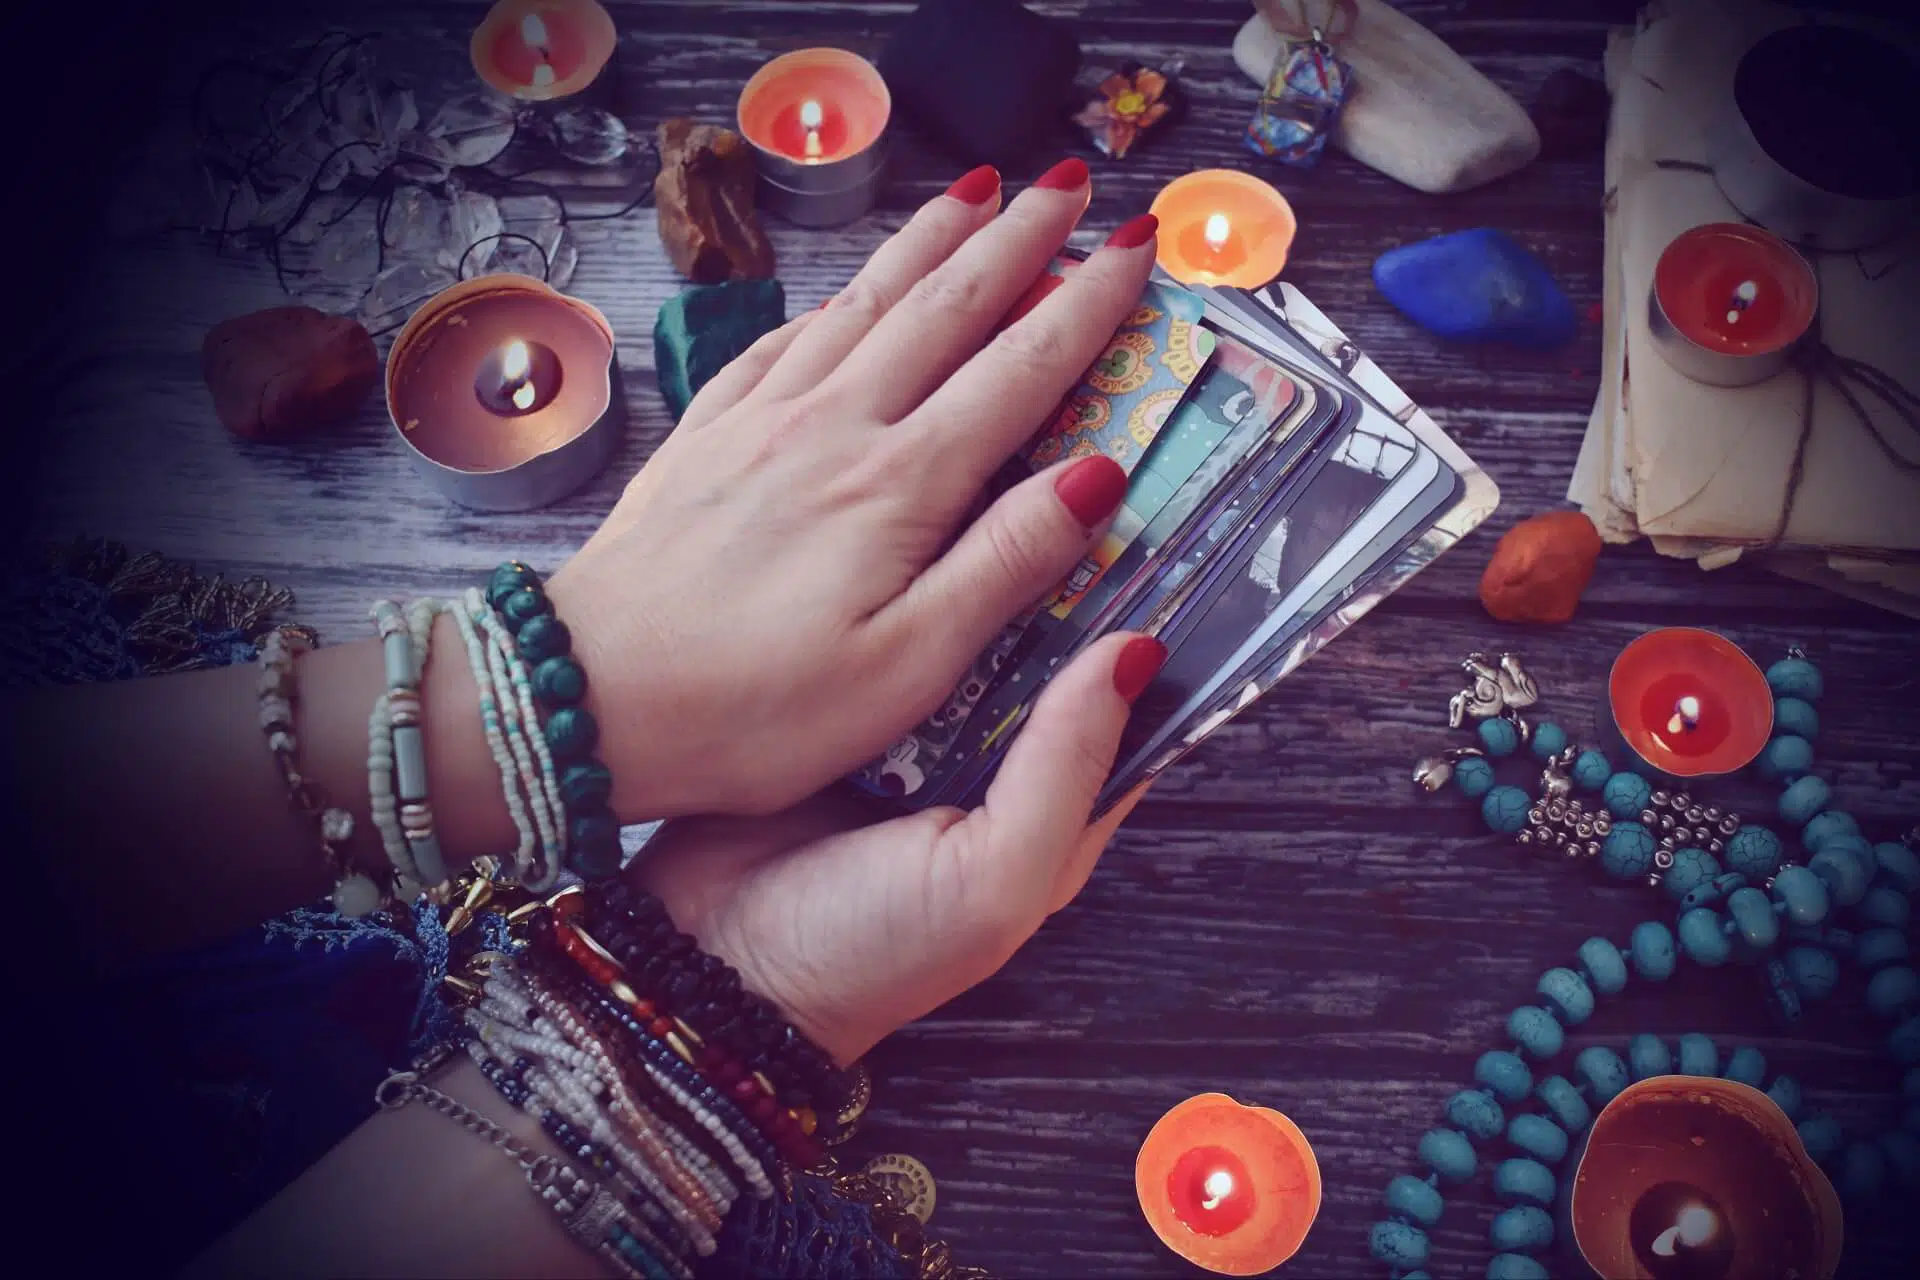 A psychic with Tarot cards